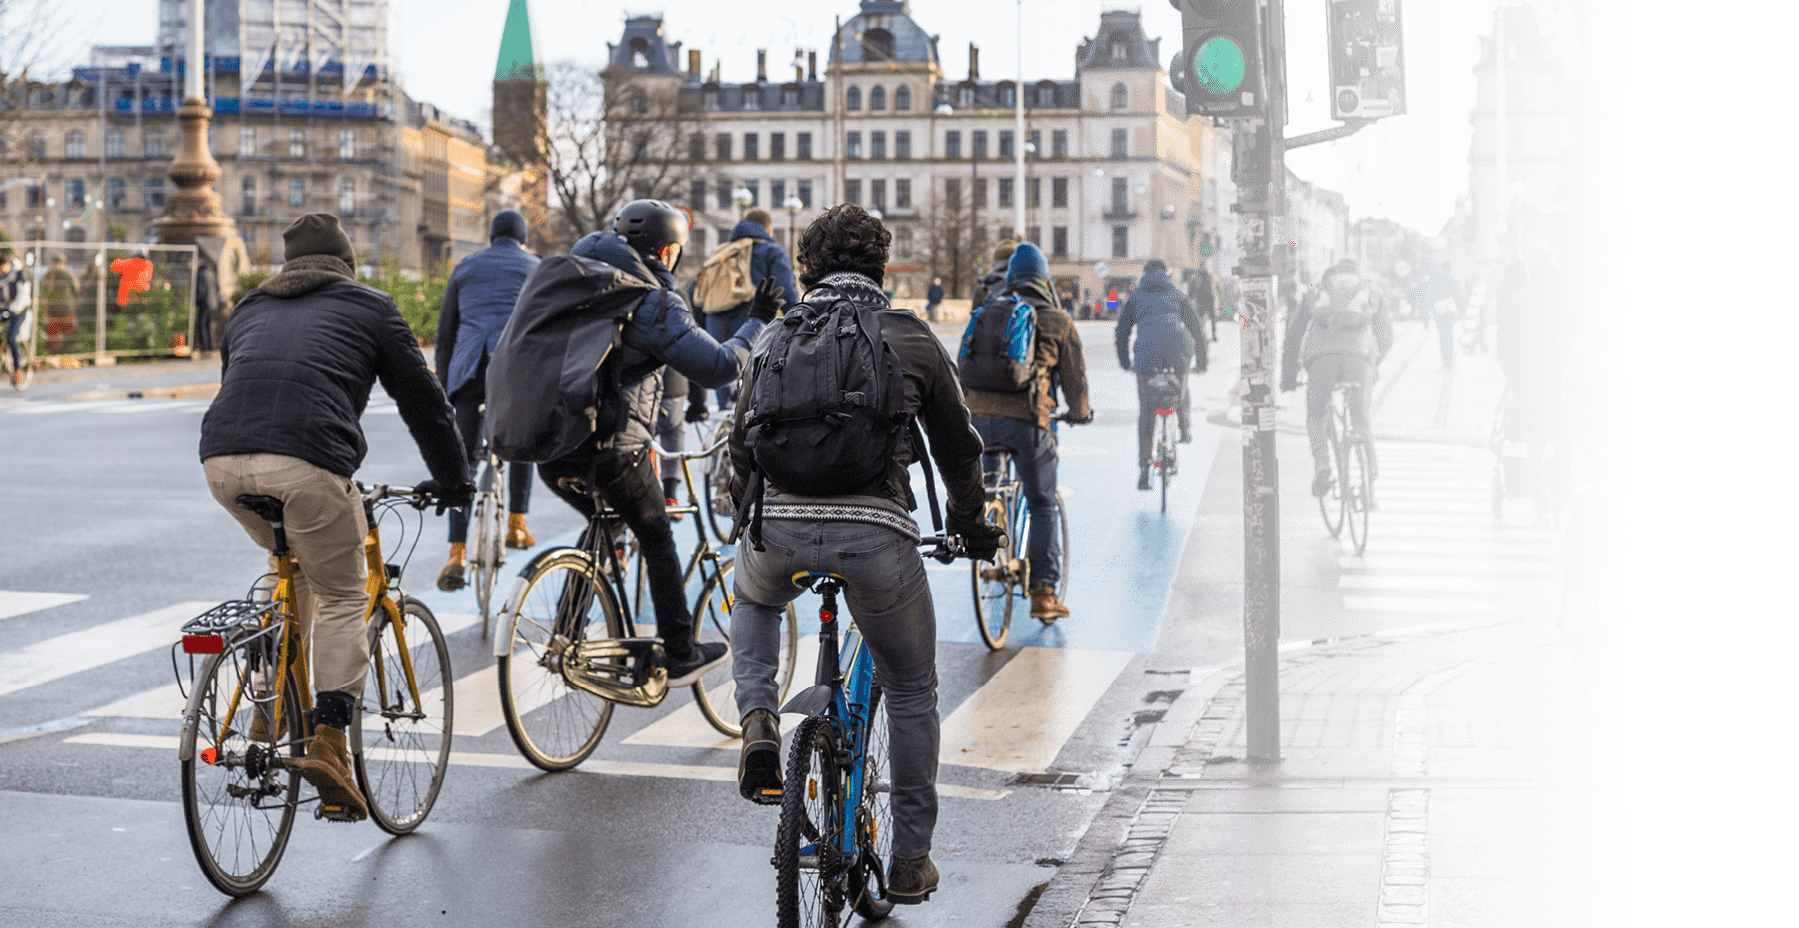 Bicyclists on road in Copenhagen. Denmark; Shutterstock ID 511558084; purchase_order: -; job: -; client: -; other: -